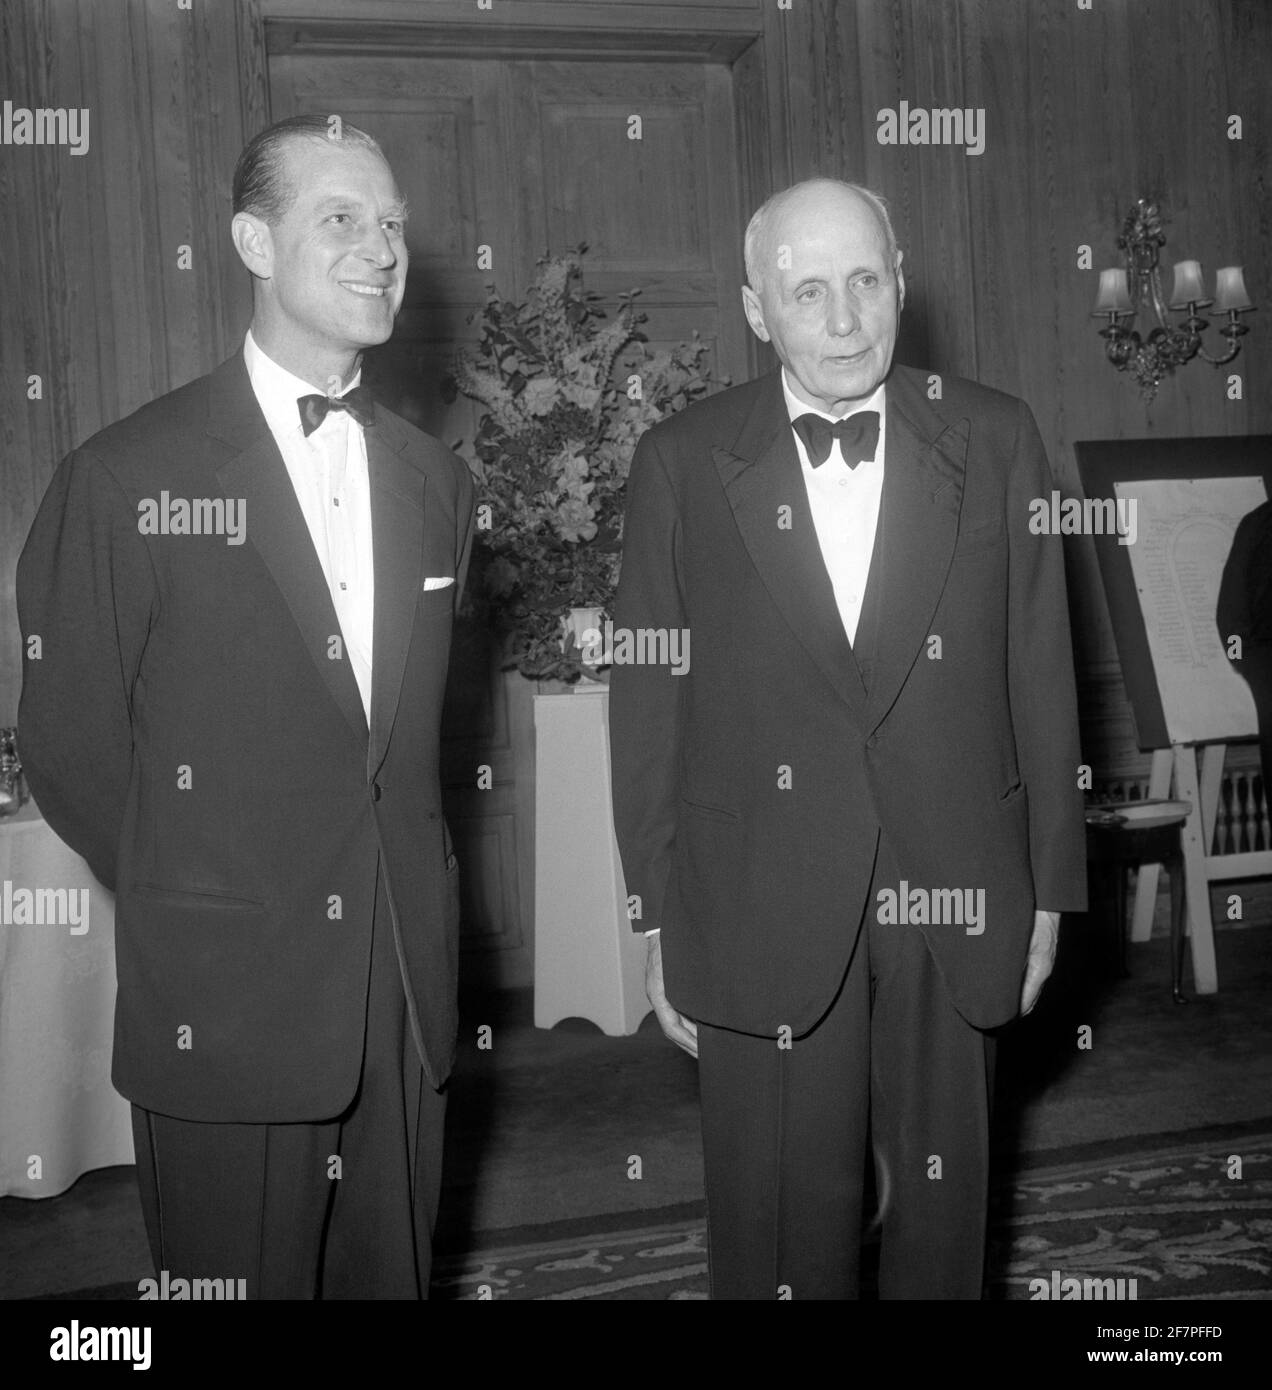 File photo dated 04/06/64 of the Duke of Edinburgh, ex pupil of Gordonstoun, meeting his old headmaster, Dr. Kurt Hahn, at a dinner given in the doctor's honour by The Friends of Gordonstoun. The Duke of Edinburgh's Award is likely to be judged Prince Philip's greatest legacy. Issue date: Friday April 4, 2021. Stock Photo